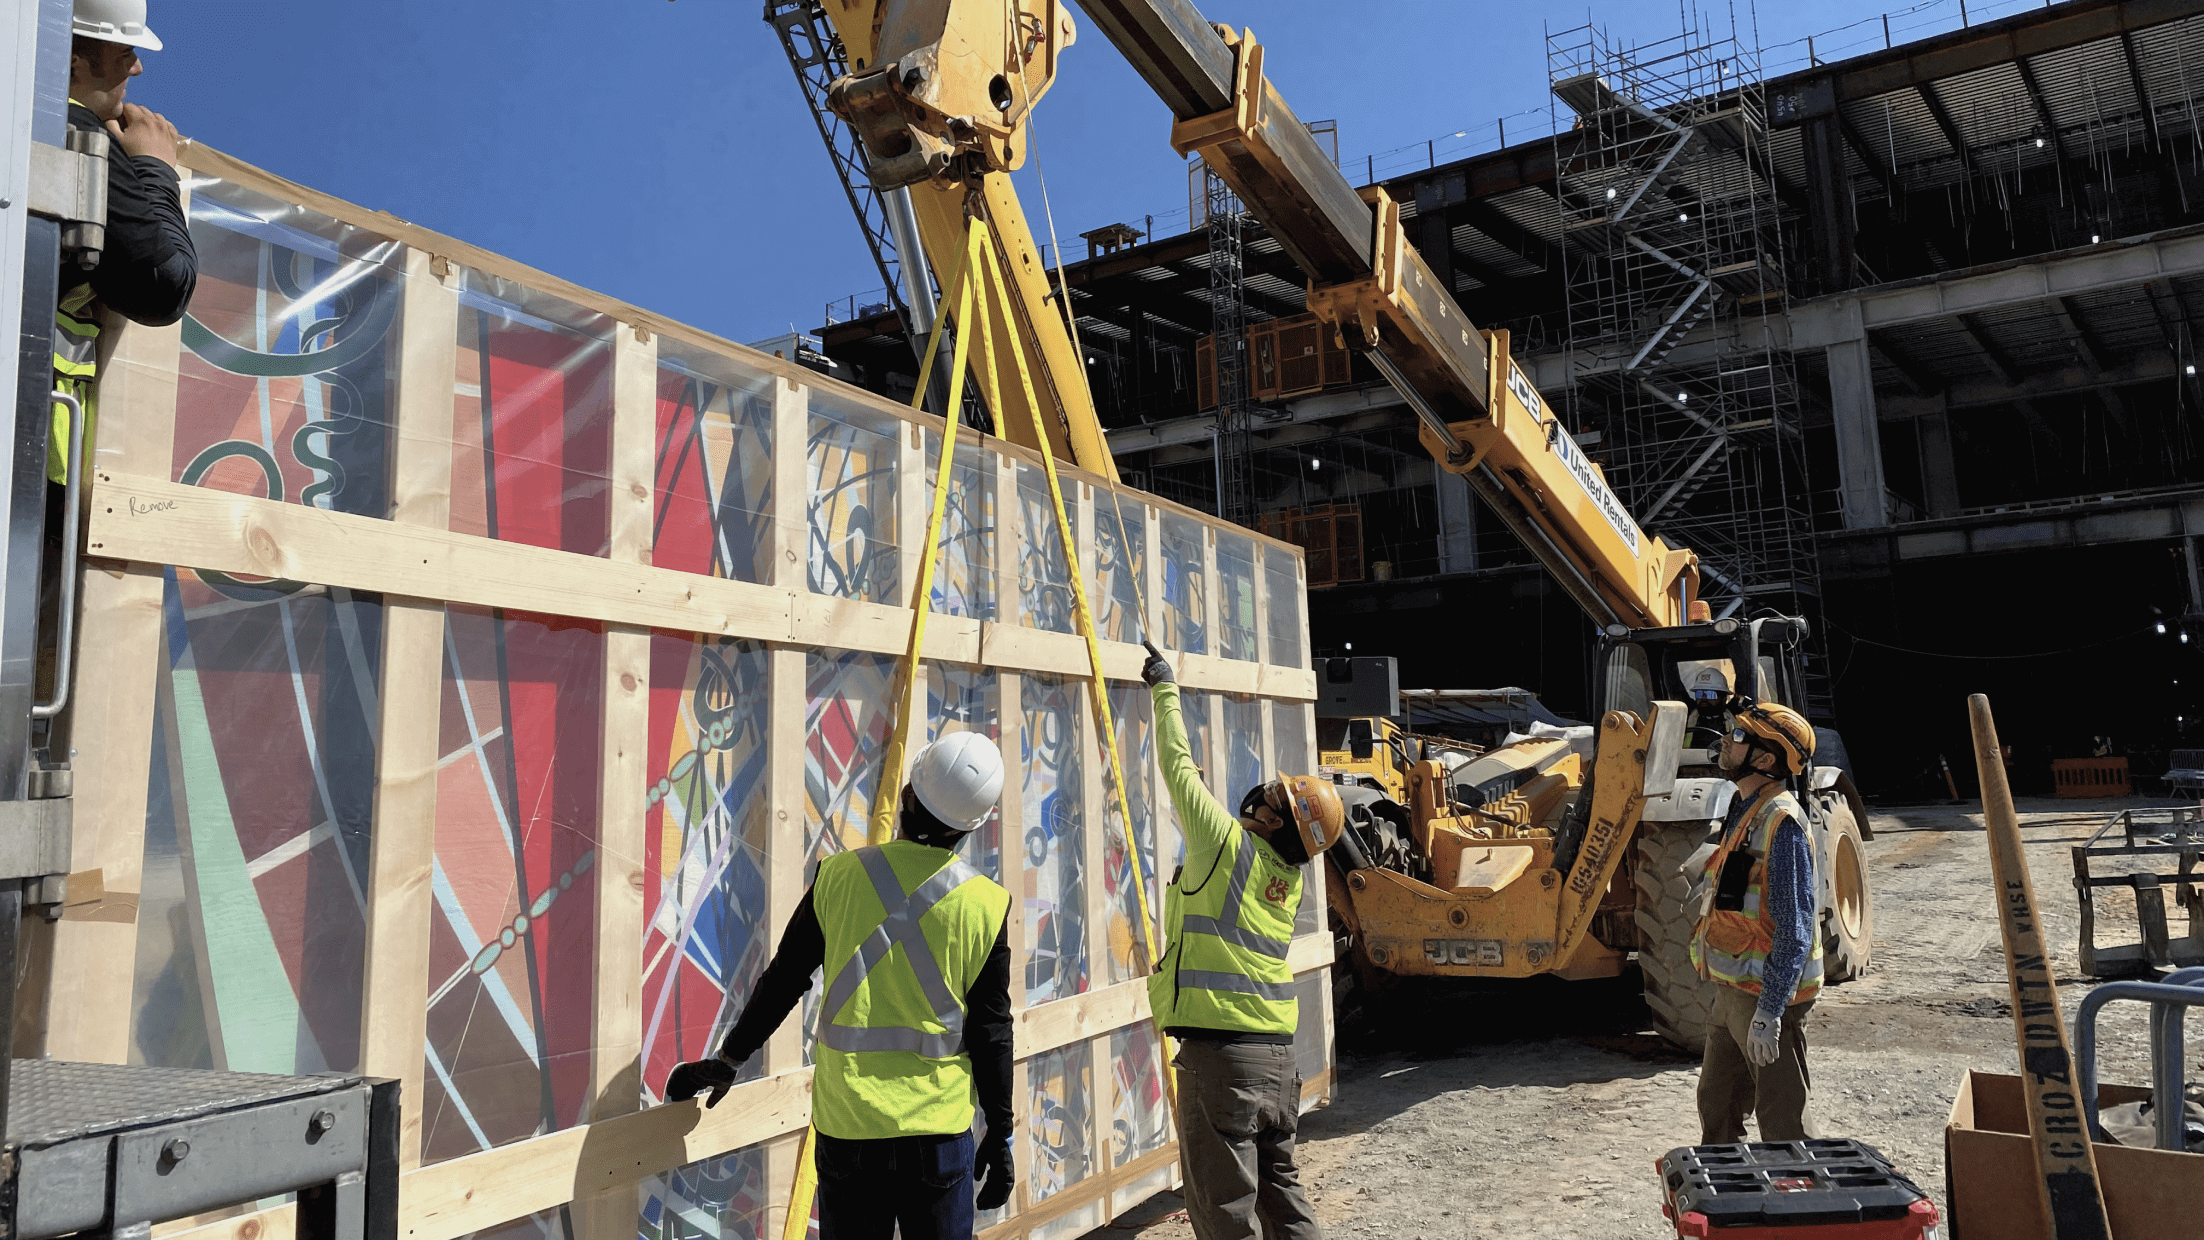 There were stringent procedures in place to deliver the heavy panels to the job site, including trucking the art in across the tarmac and lifting it in through the third floor in order to access the terminal. 